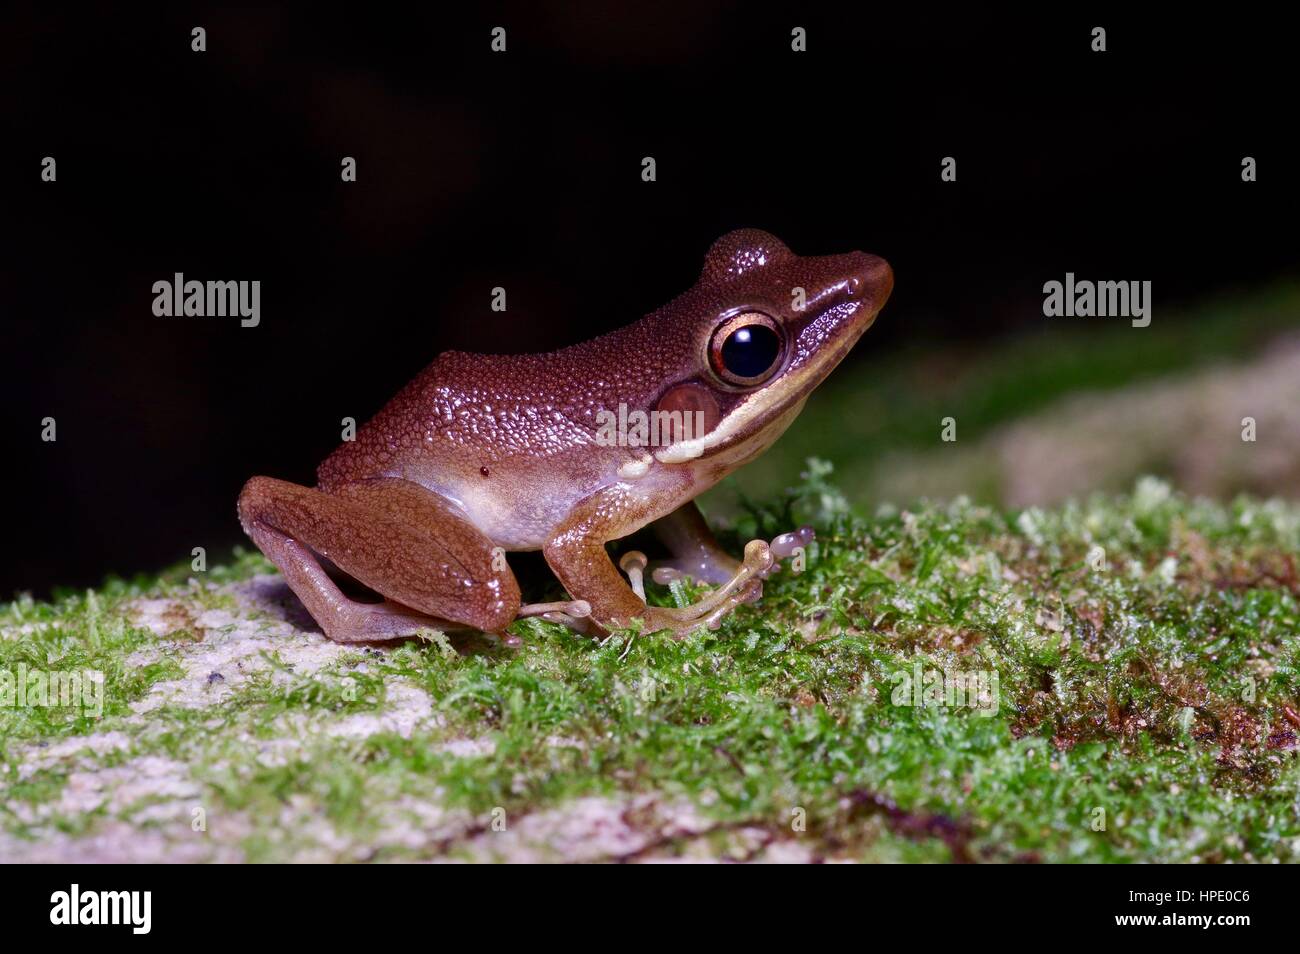 A brown Copper-cheeked Frog (Chalcorana raniceps) on a mossy rock in Santubong National Park, Sarawak, East Malaysia, Borneo Stock Photo